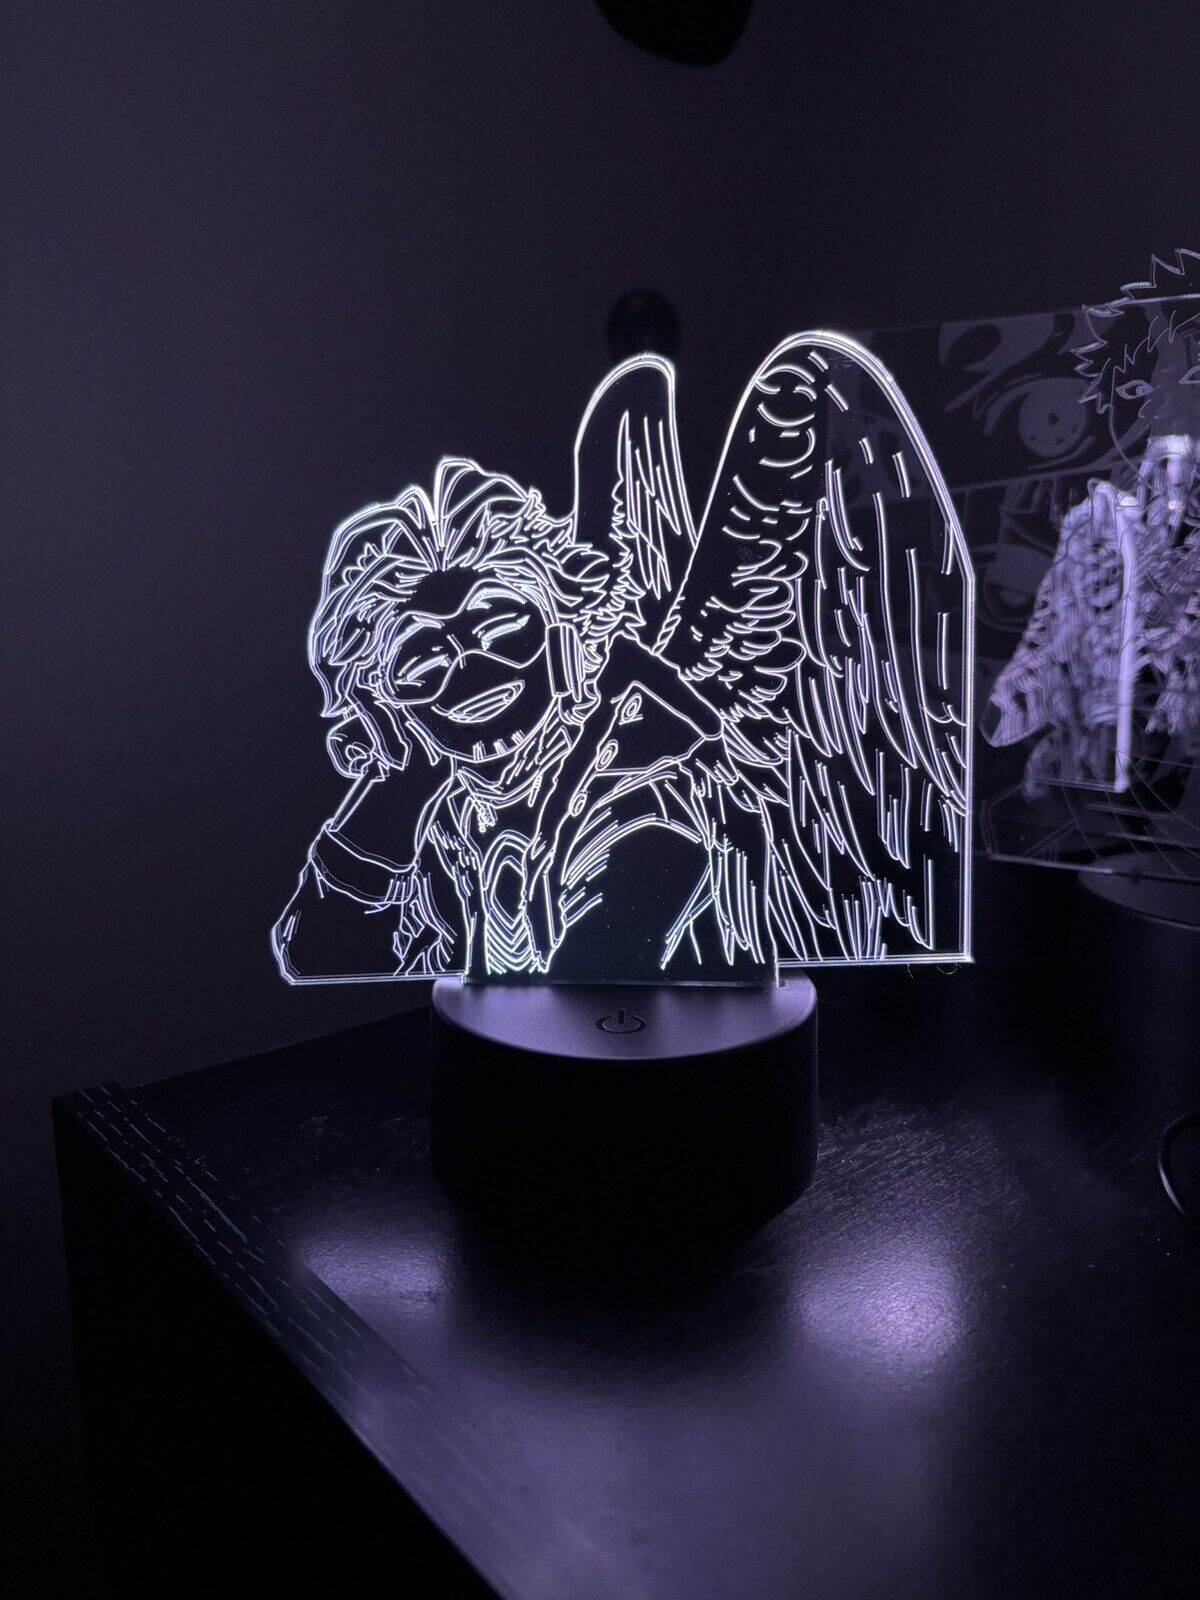 My Hero Academia: Hawks 3D USB LED 7-Colors: Color Changing Night Light